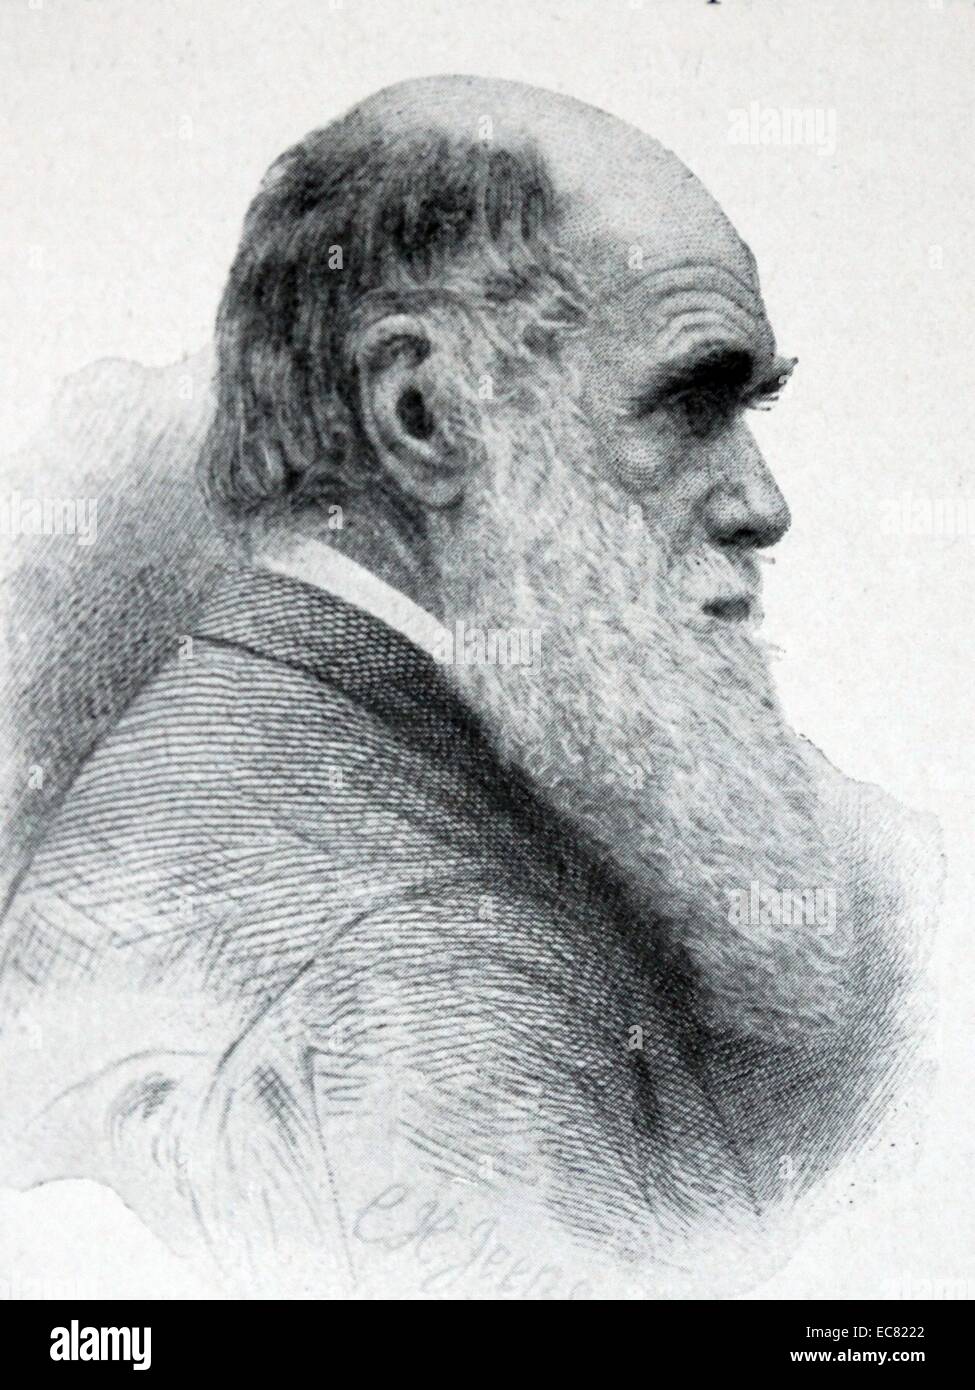 Charles Robert Darwin (12th February 1809 - 19th April 1882) was an English naturalist and geologist, best known for his evolutionary theory of humans 'Darwin's Theory'. Stock Photo